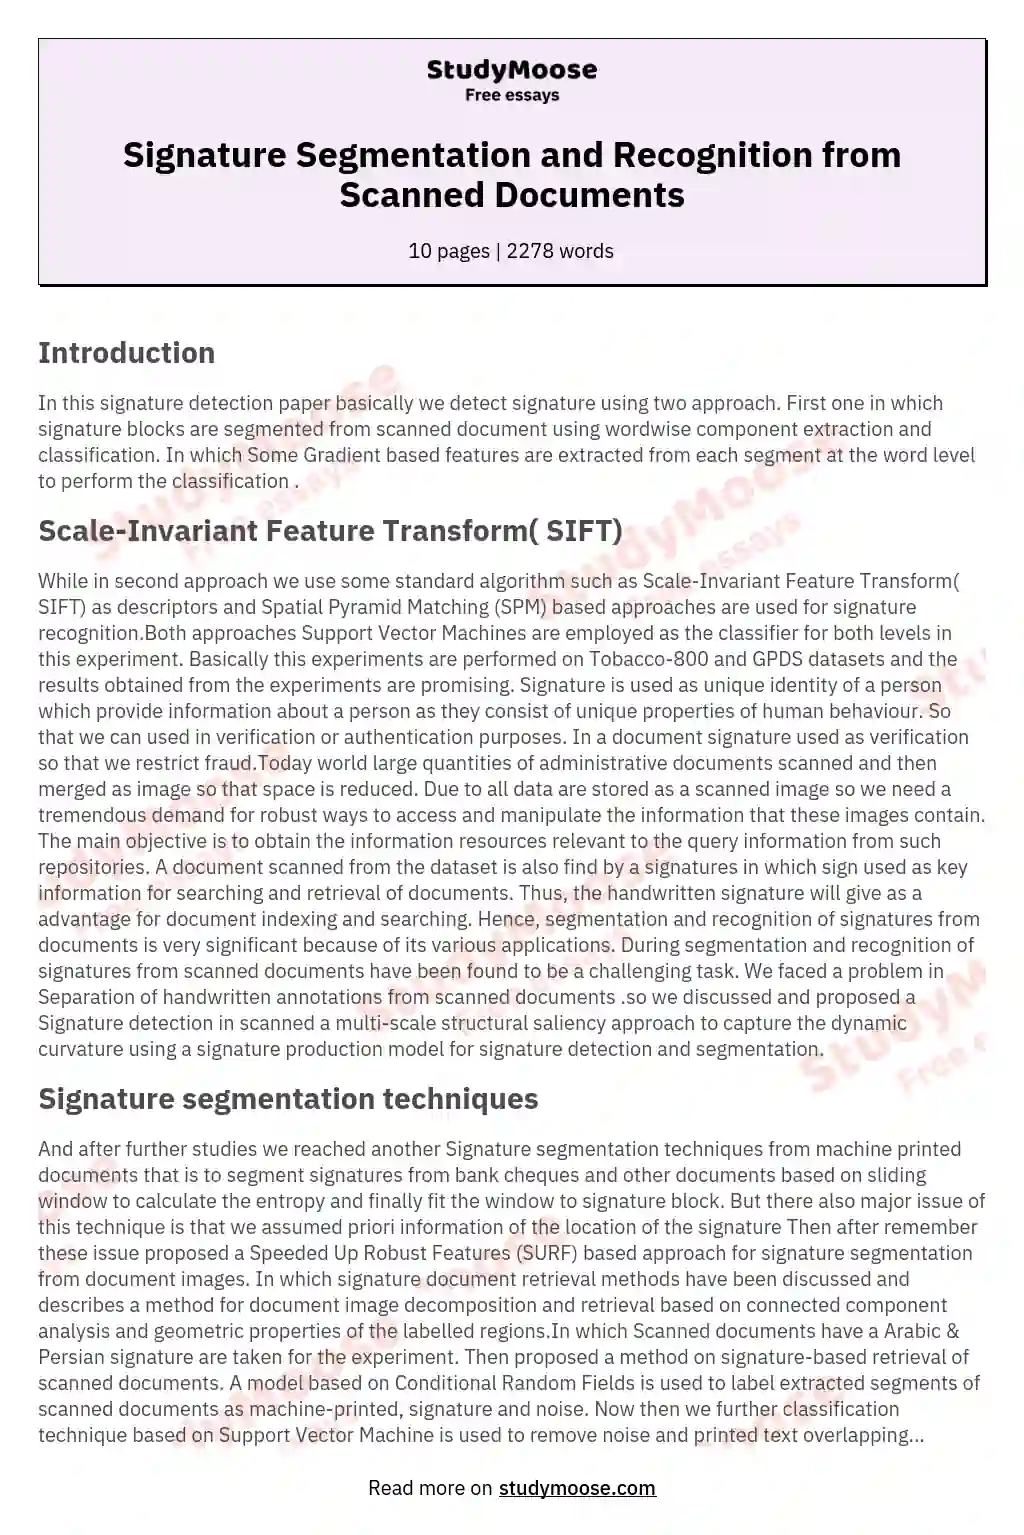 Signature Segmentation and Recognition from Scanned Documents essay